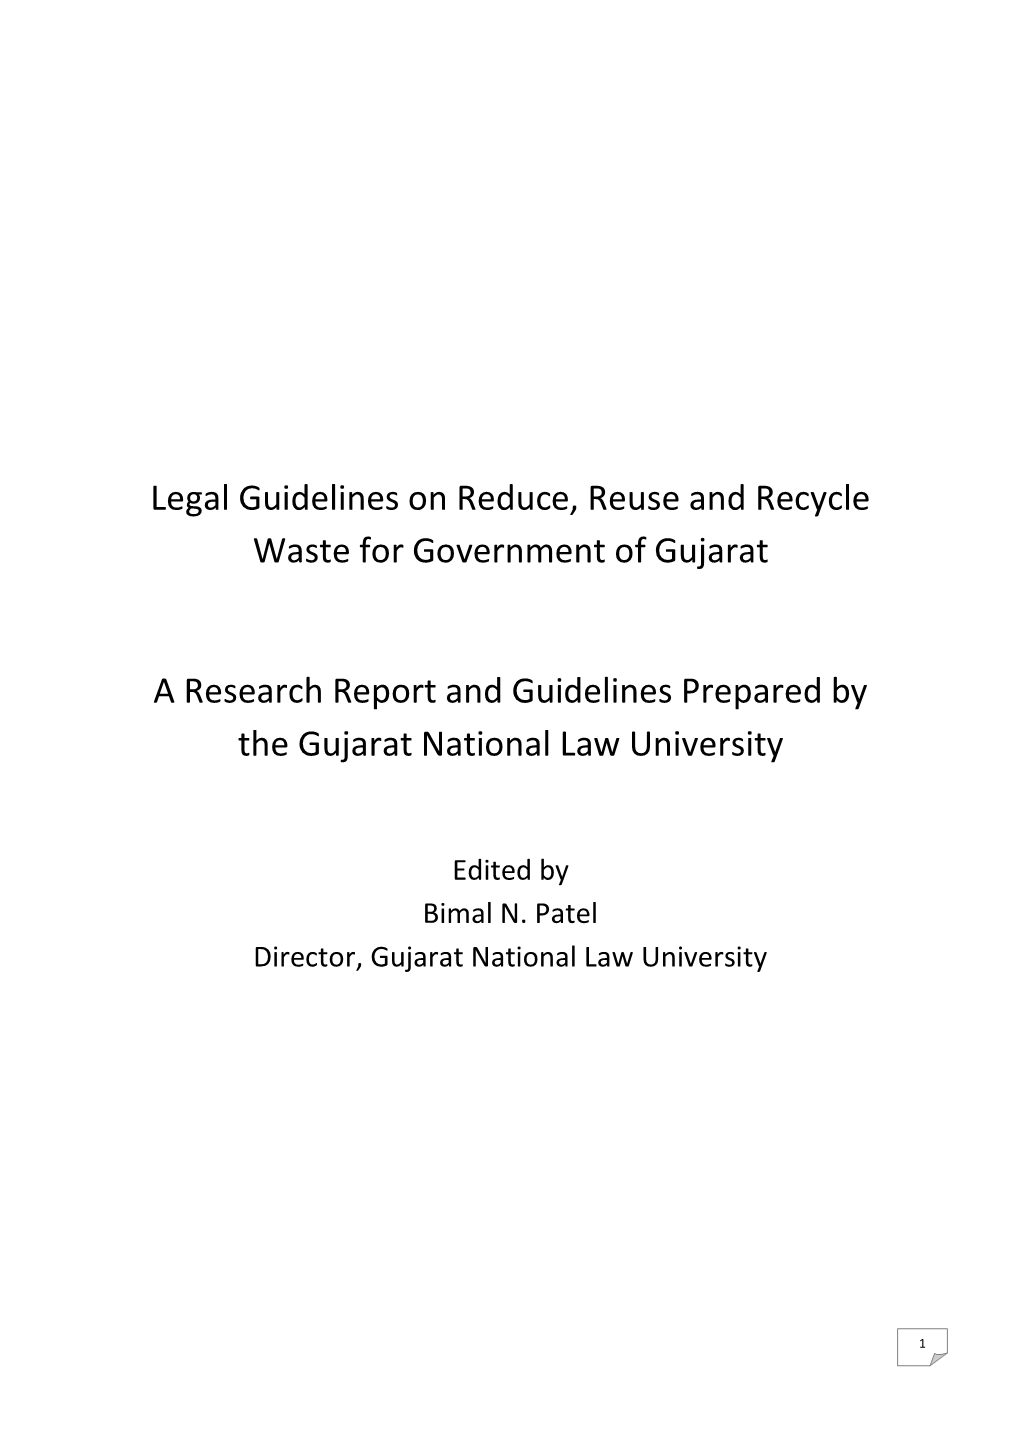 Legal Guidelines on Reduce, Reuse and Recycle Waste for Government of Gujarat a Research Report and Guidelines Prepared by the G